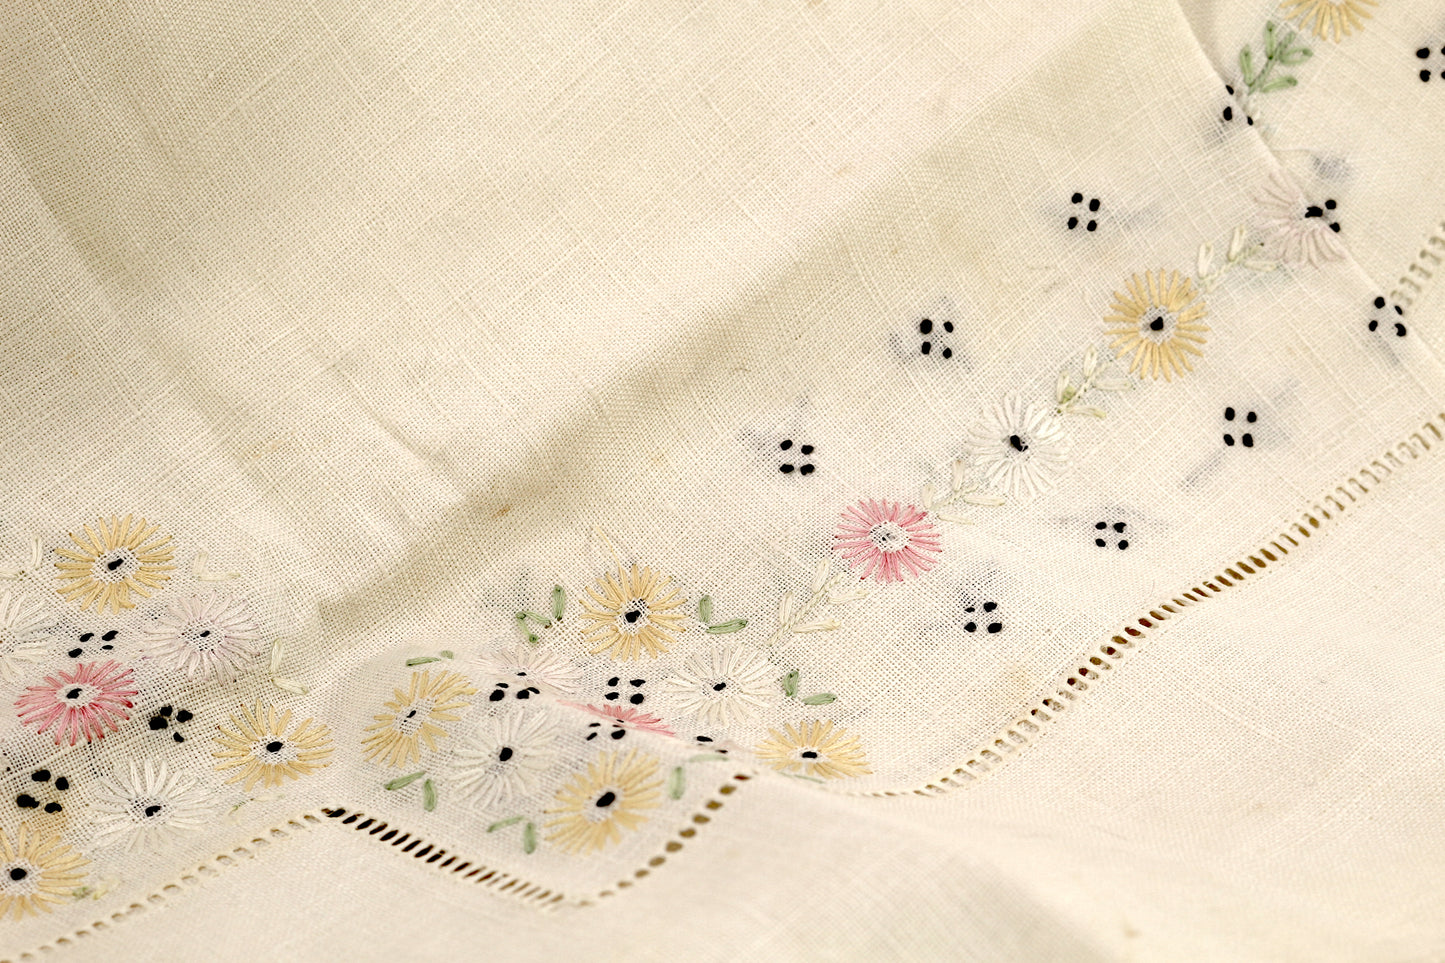 Vintage Linen Tablecloth with Hand Embroidery Measures 30" x 30"